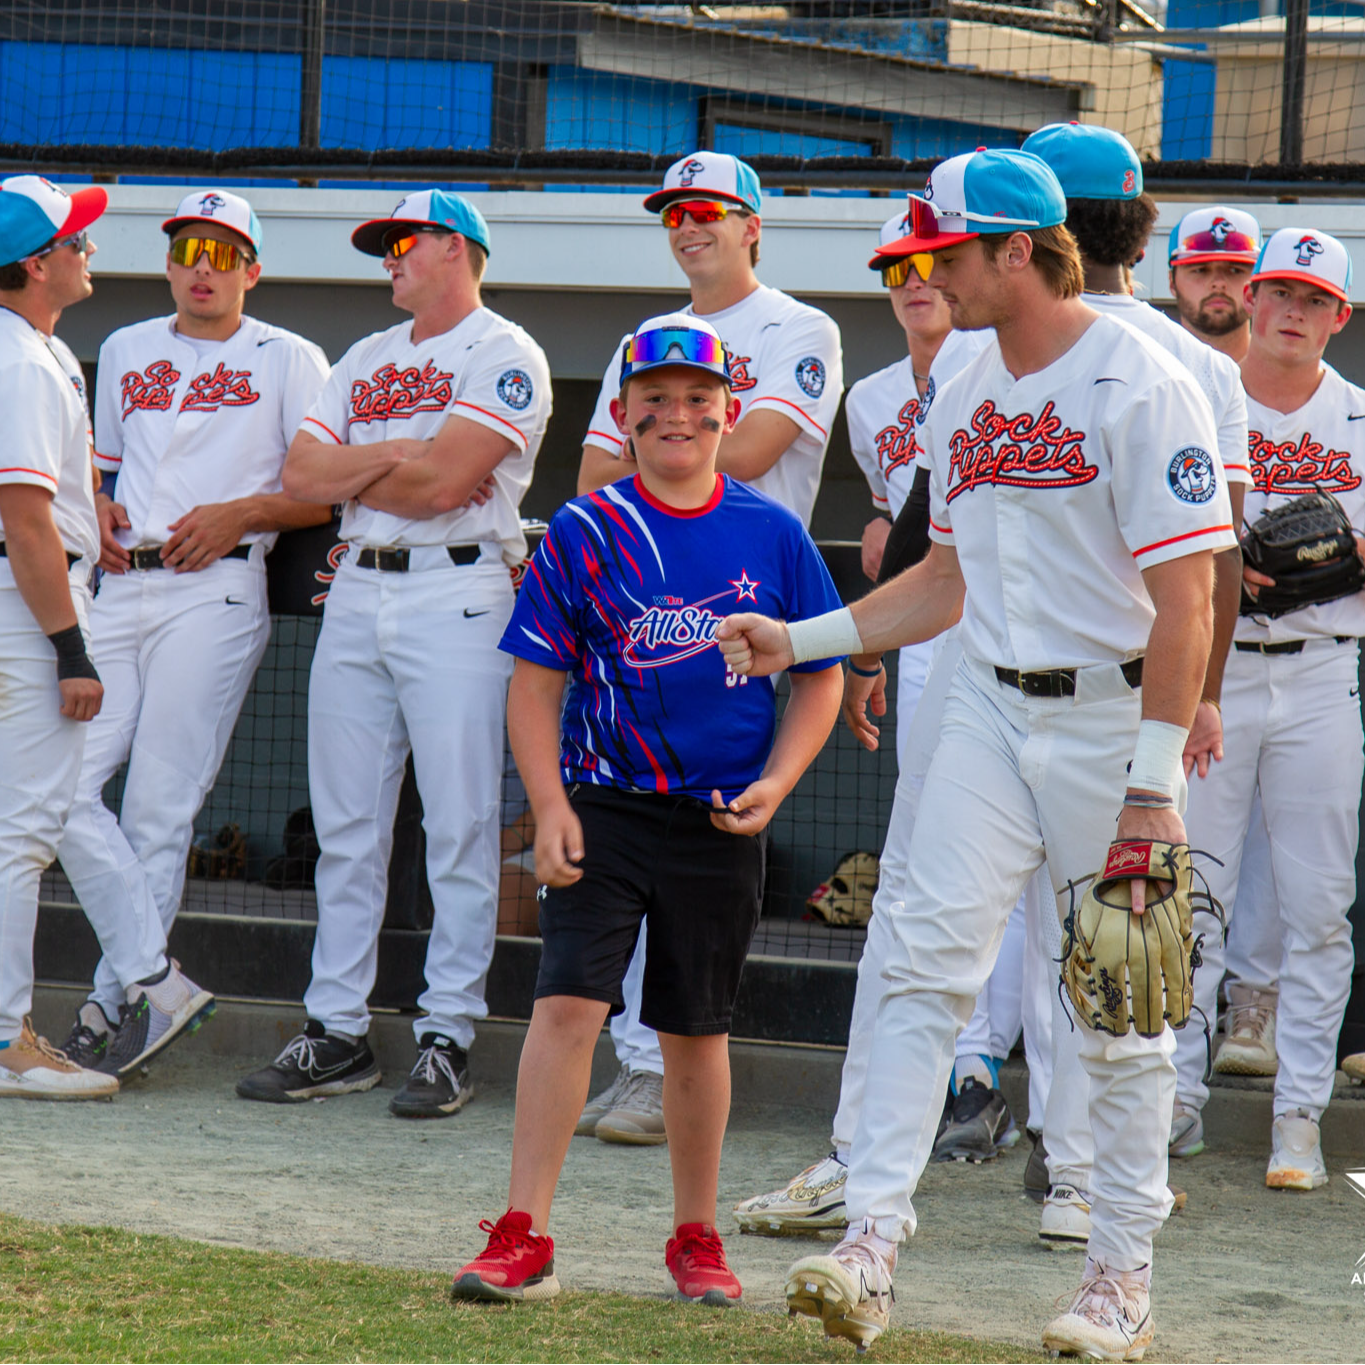 A player from the Sock Puppets baseball team holds out his fist for a first bump towards a student in a blue All Stars jersey